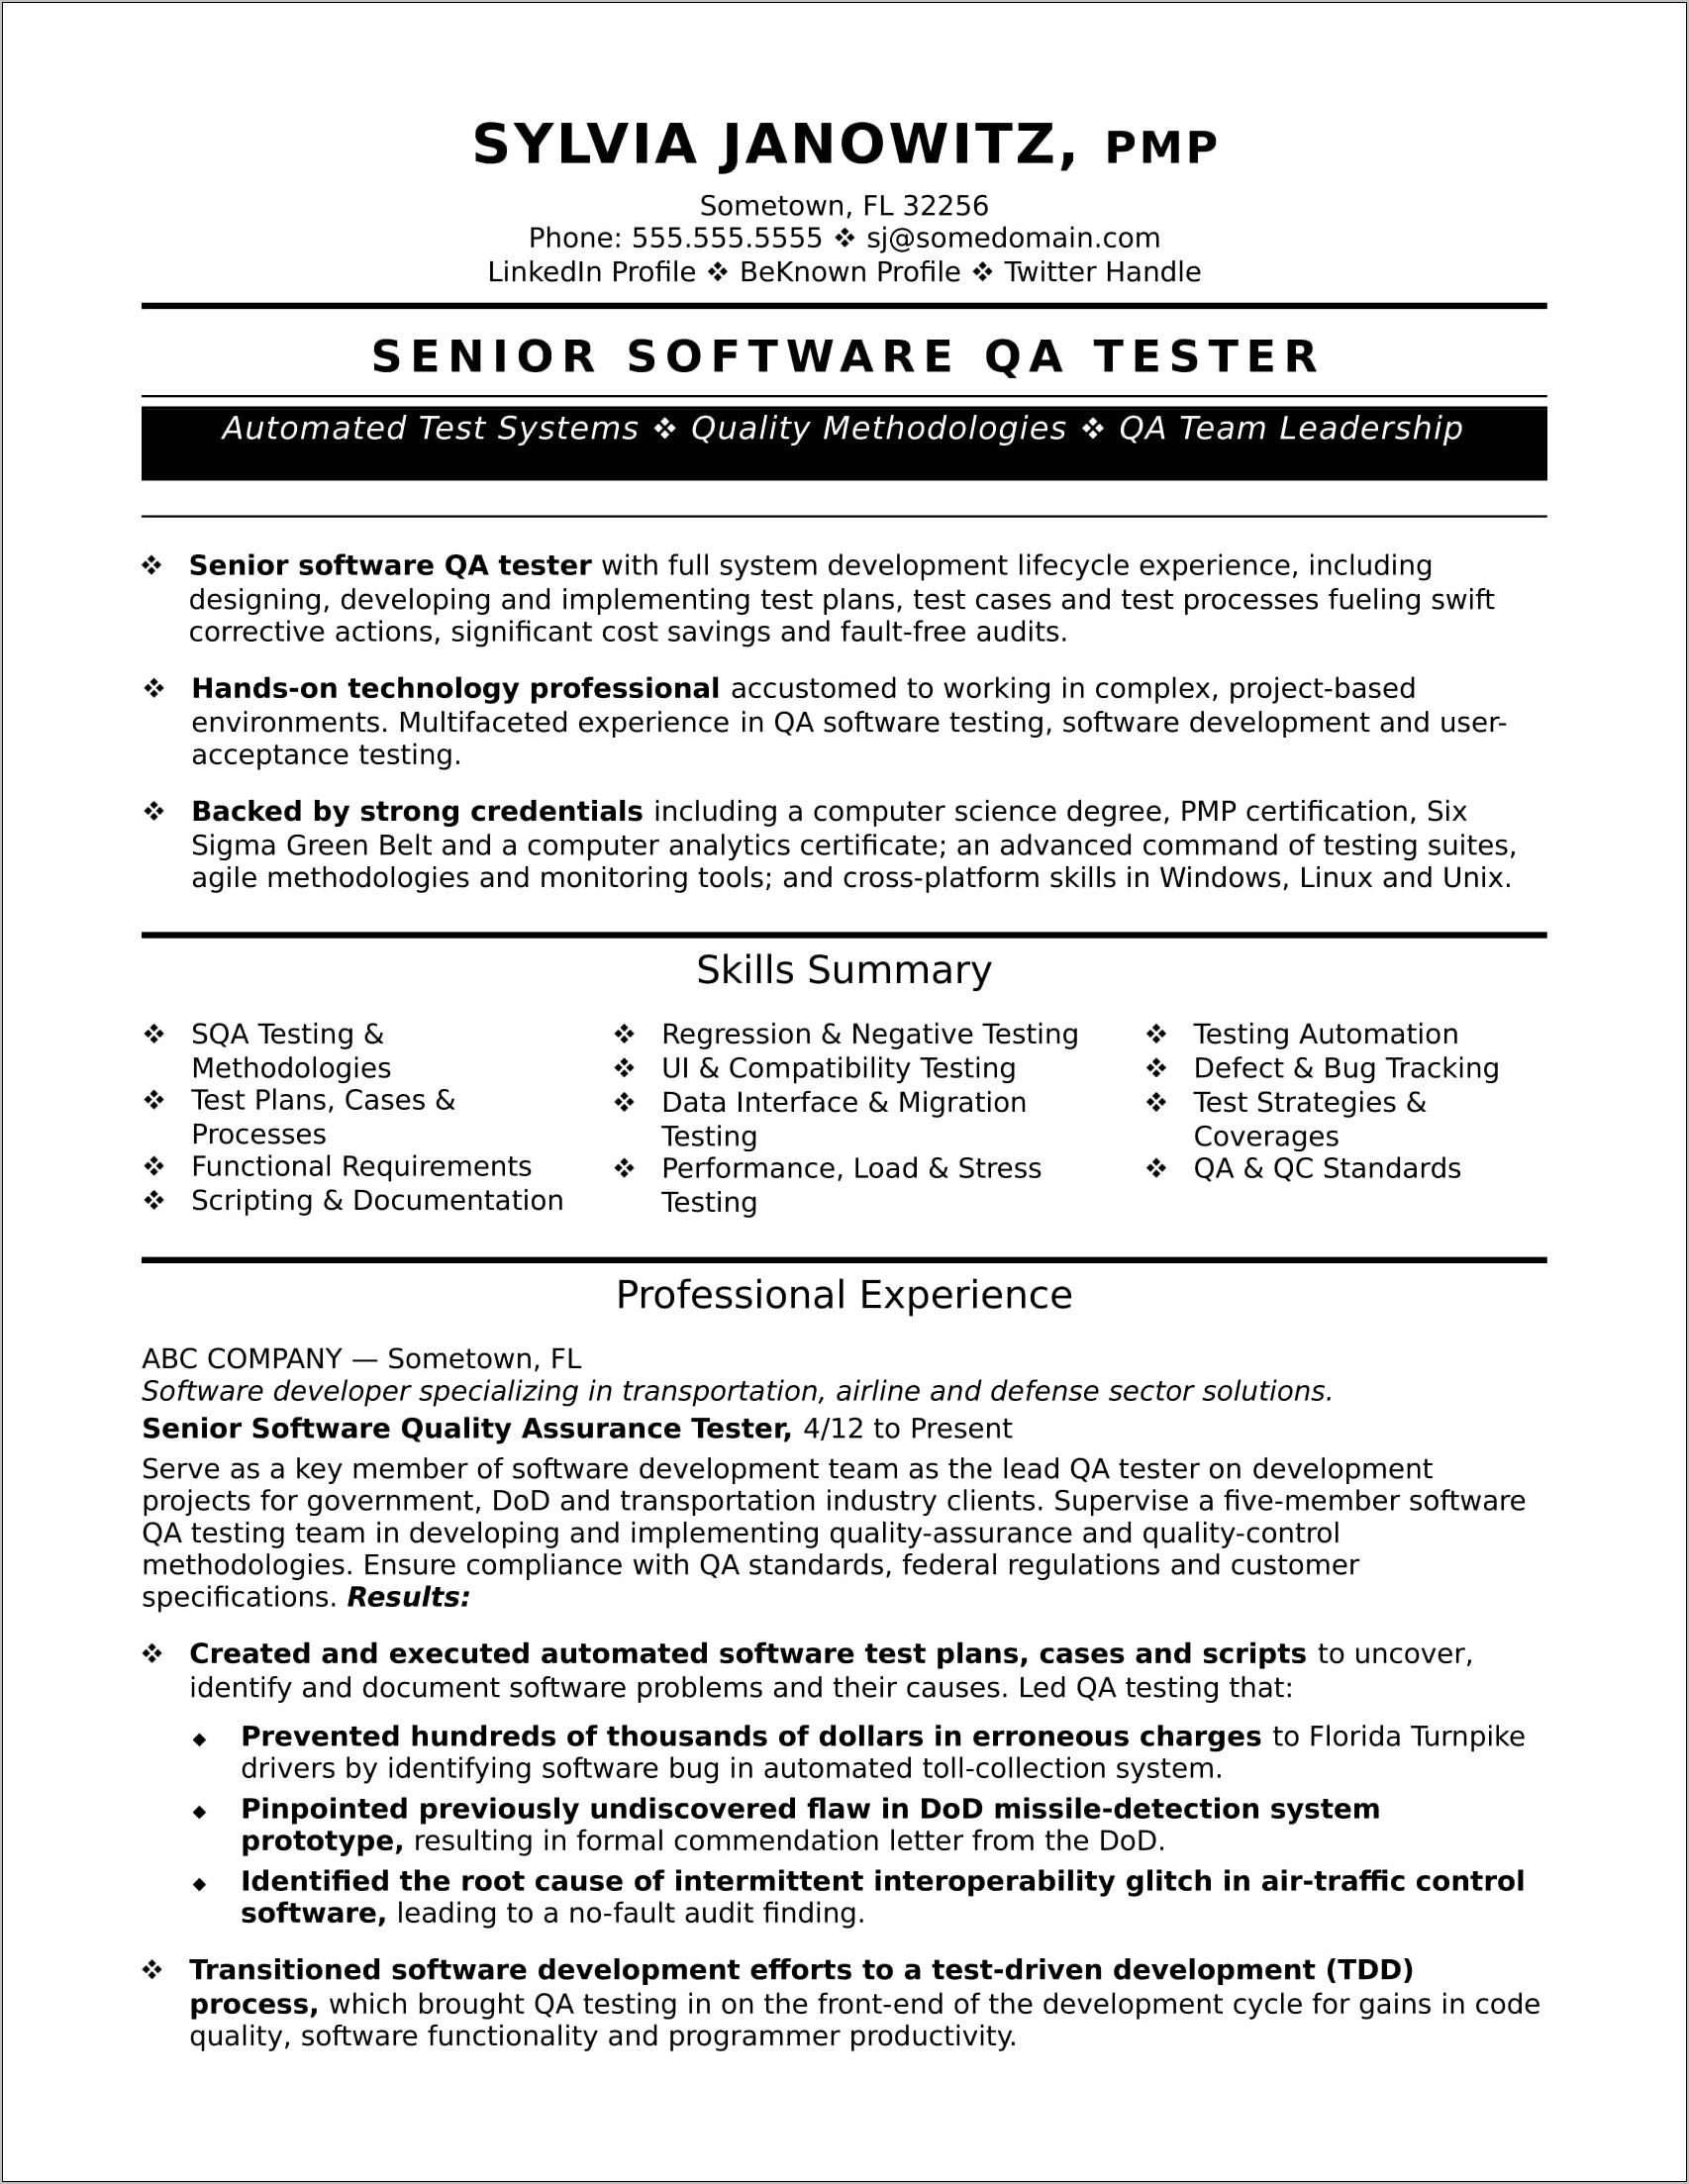 Automation Testing Resume For 10 Years In Experience